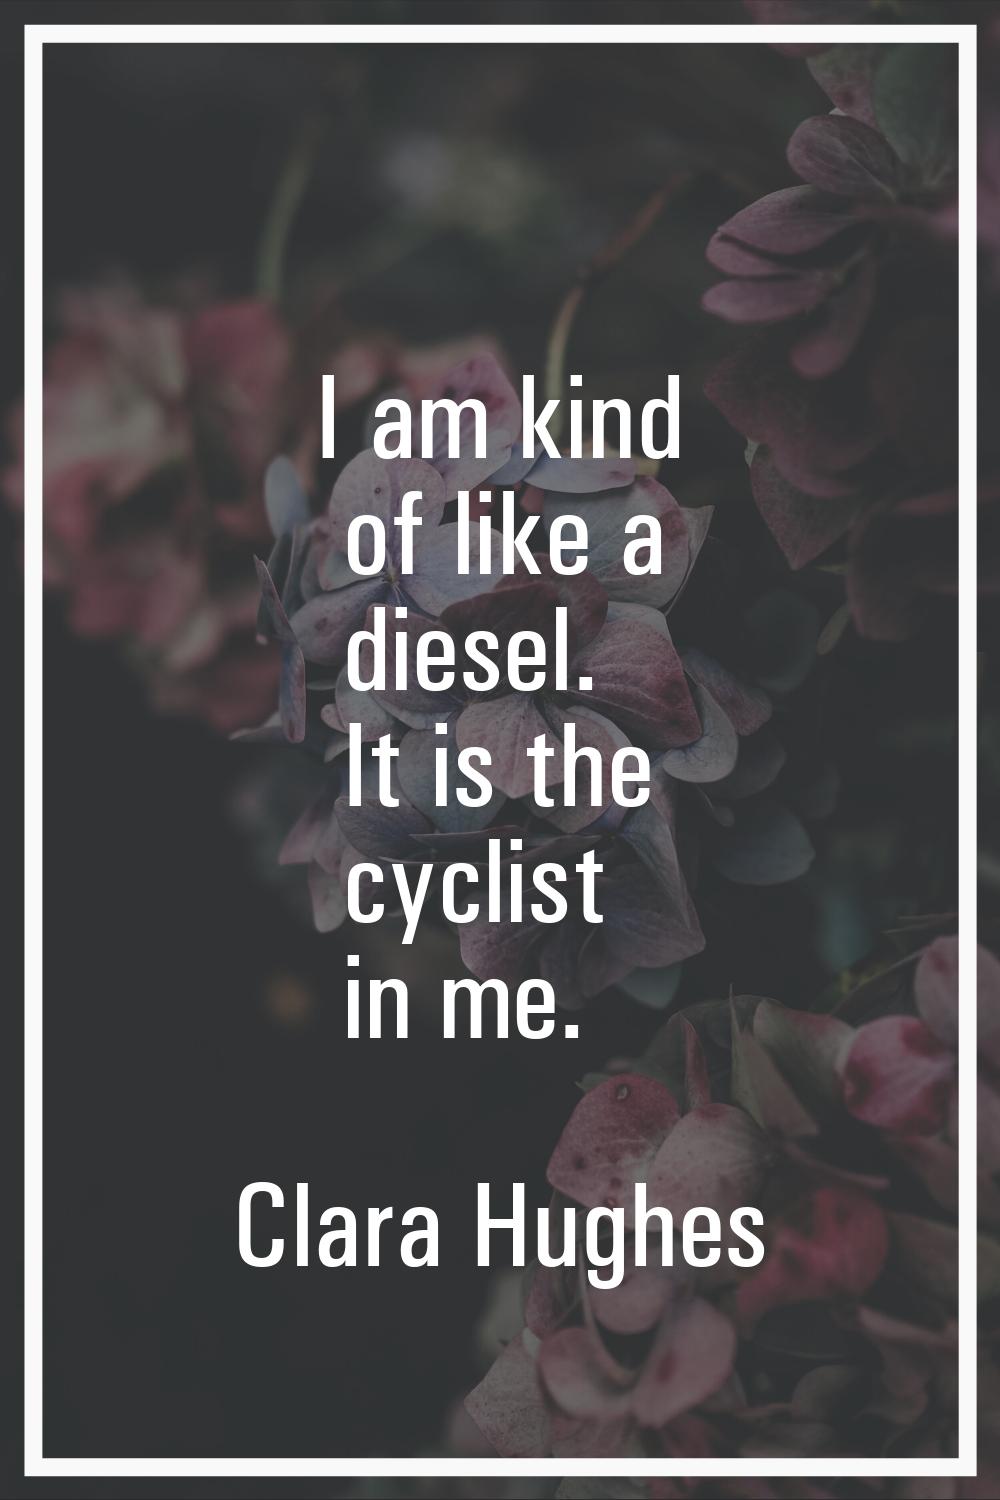 I am kind of like a diesel. It is the cyclist in me.